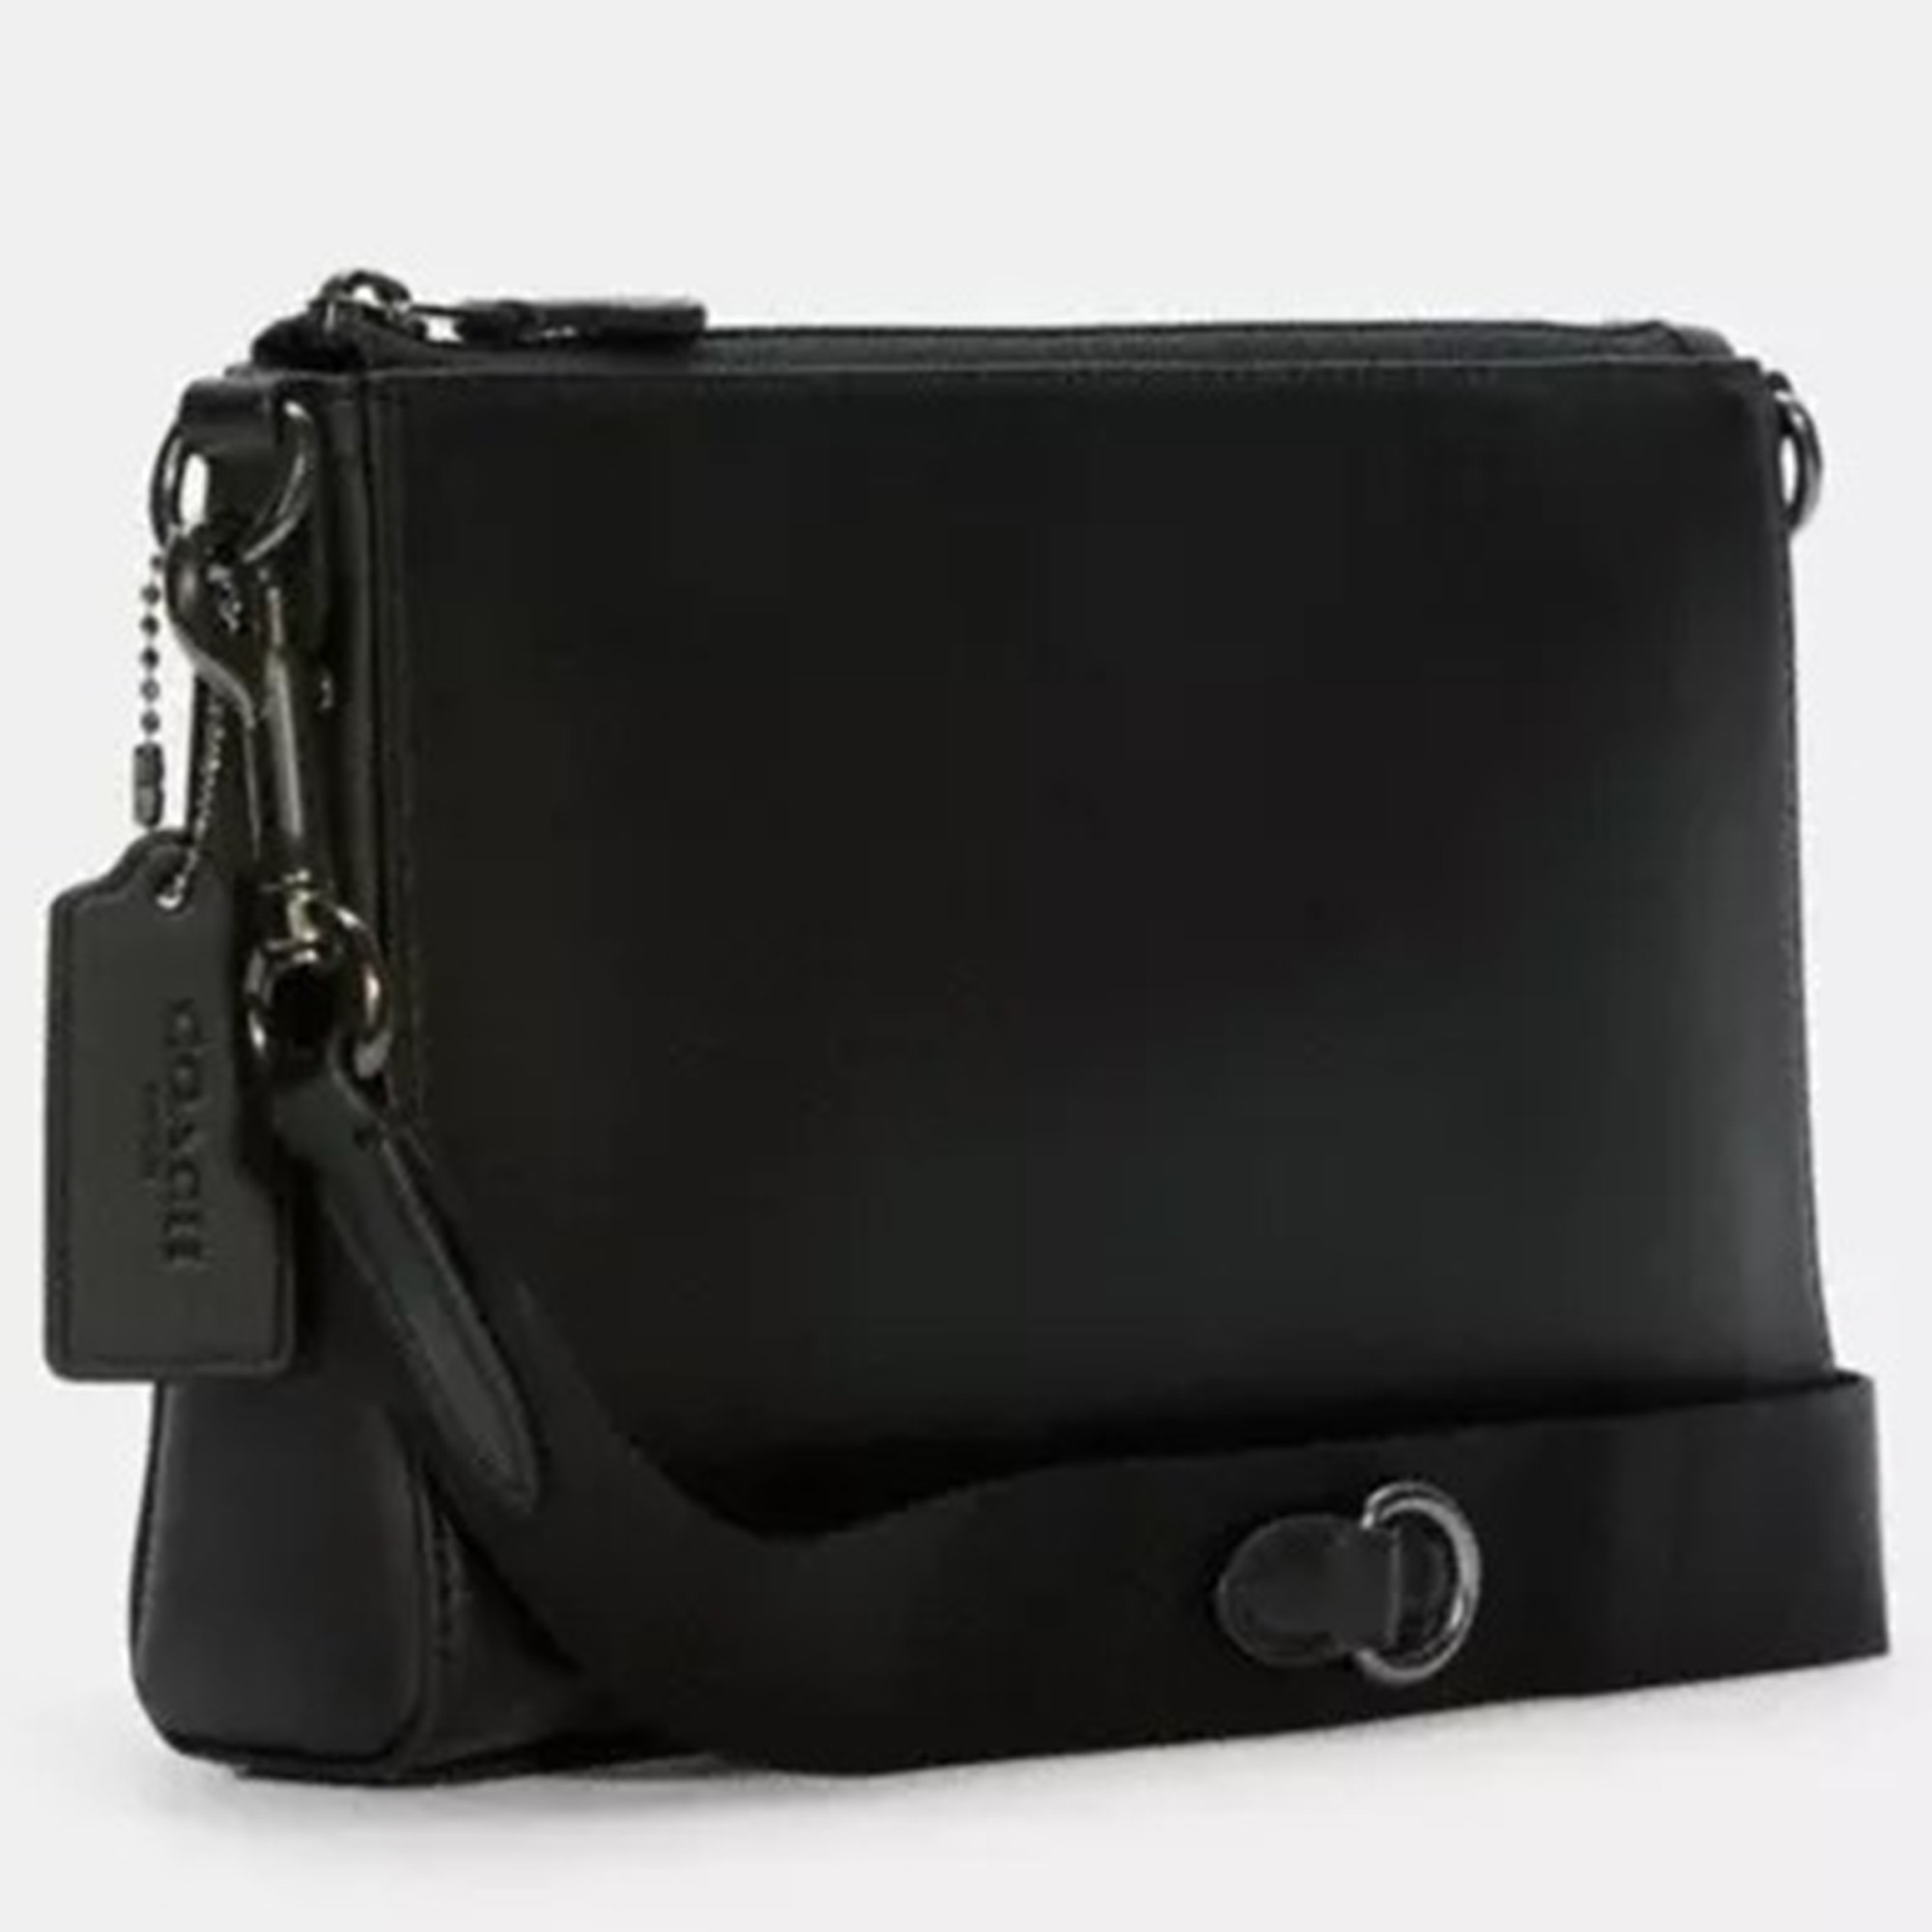 Coach Black Signature Canvas And Leather Holden Crossbody Bag